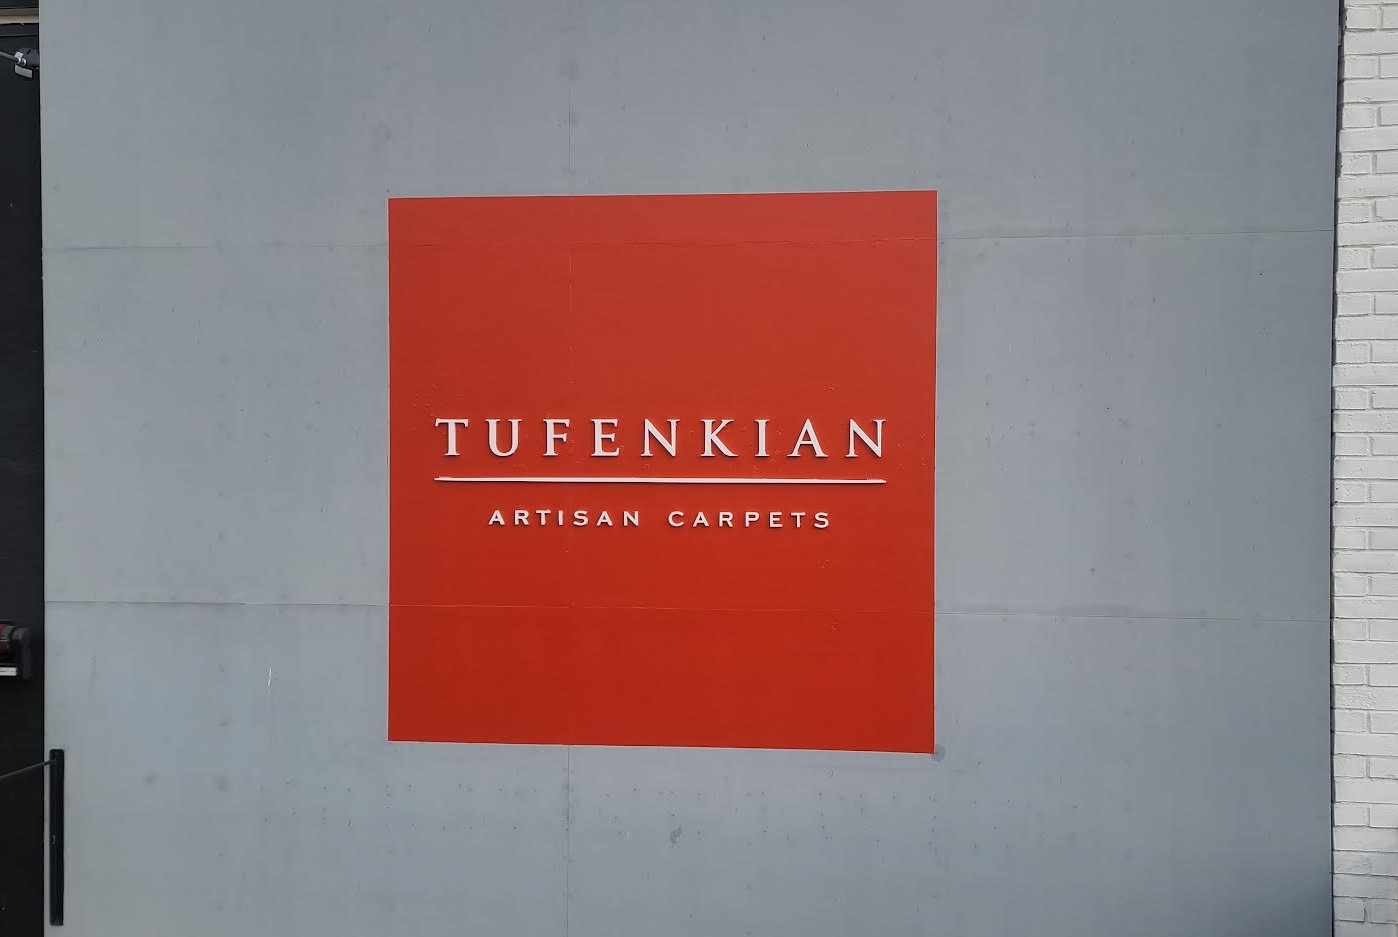 For Tufenkian Artisan Carpets we painted their exterior wall white, painted a red square and then installed laser cut white acrylic letters.